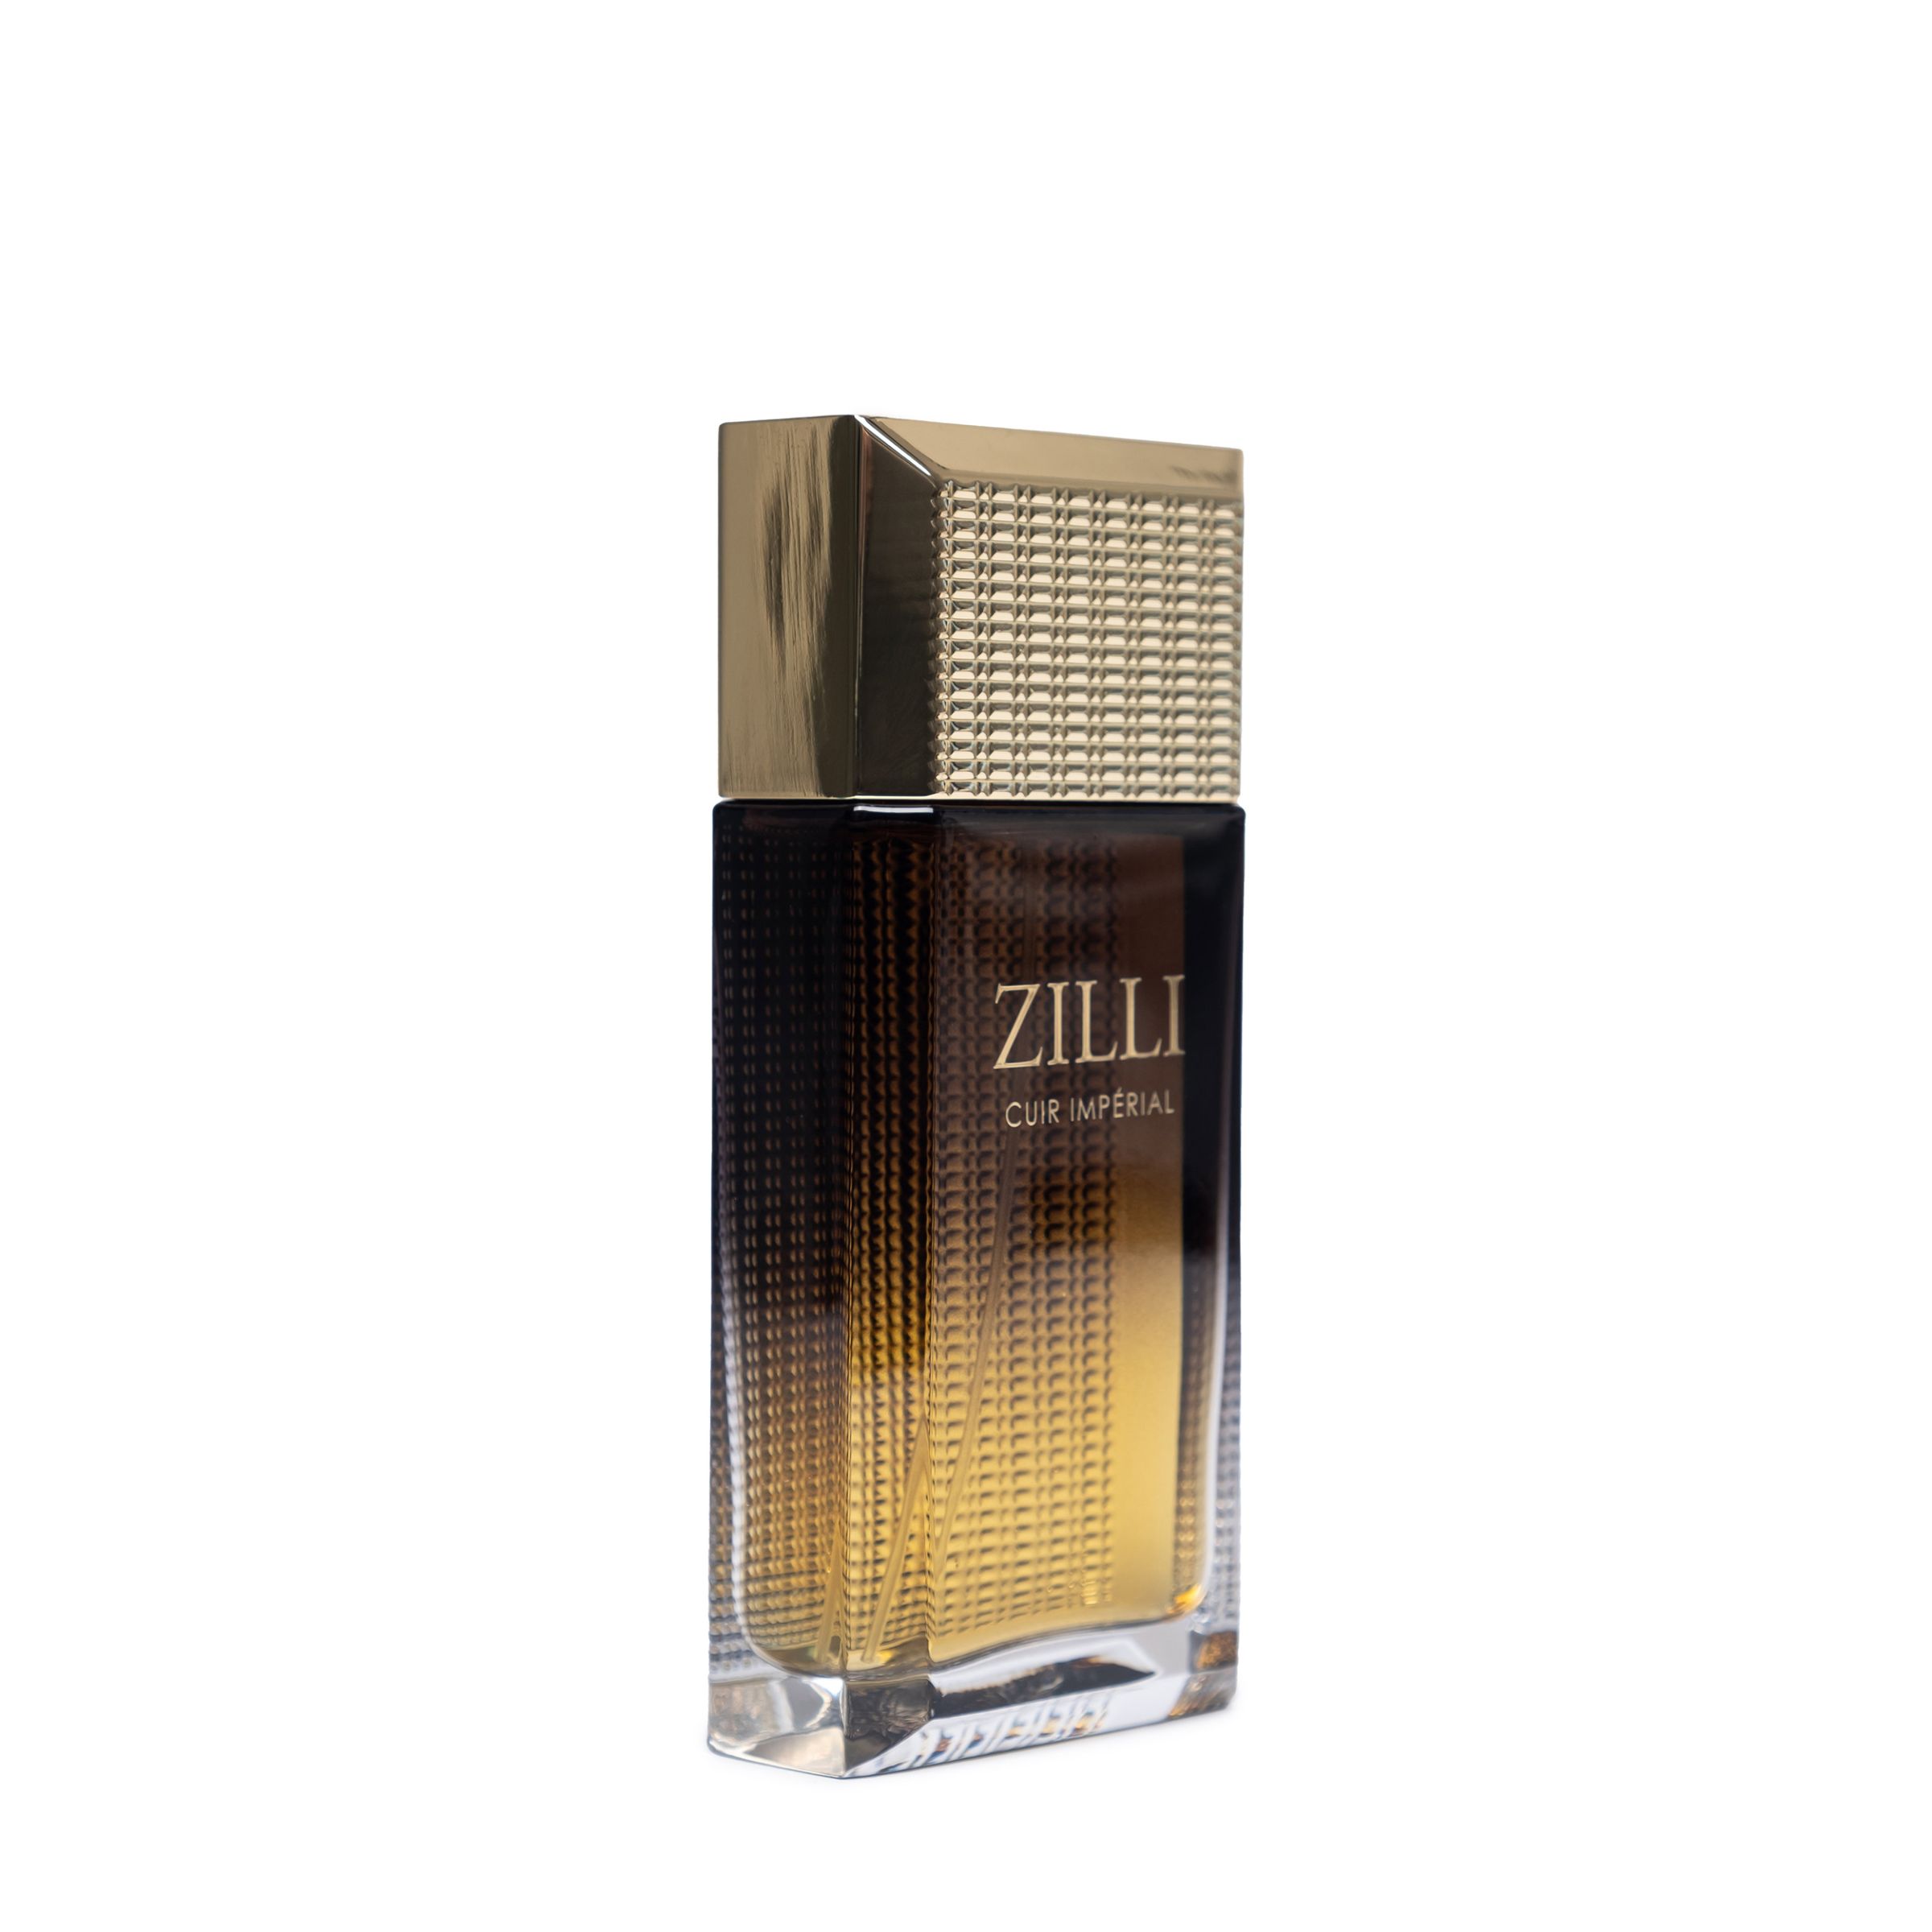 Парфюм Zilli CUIR IMPERIAL